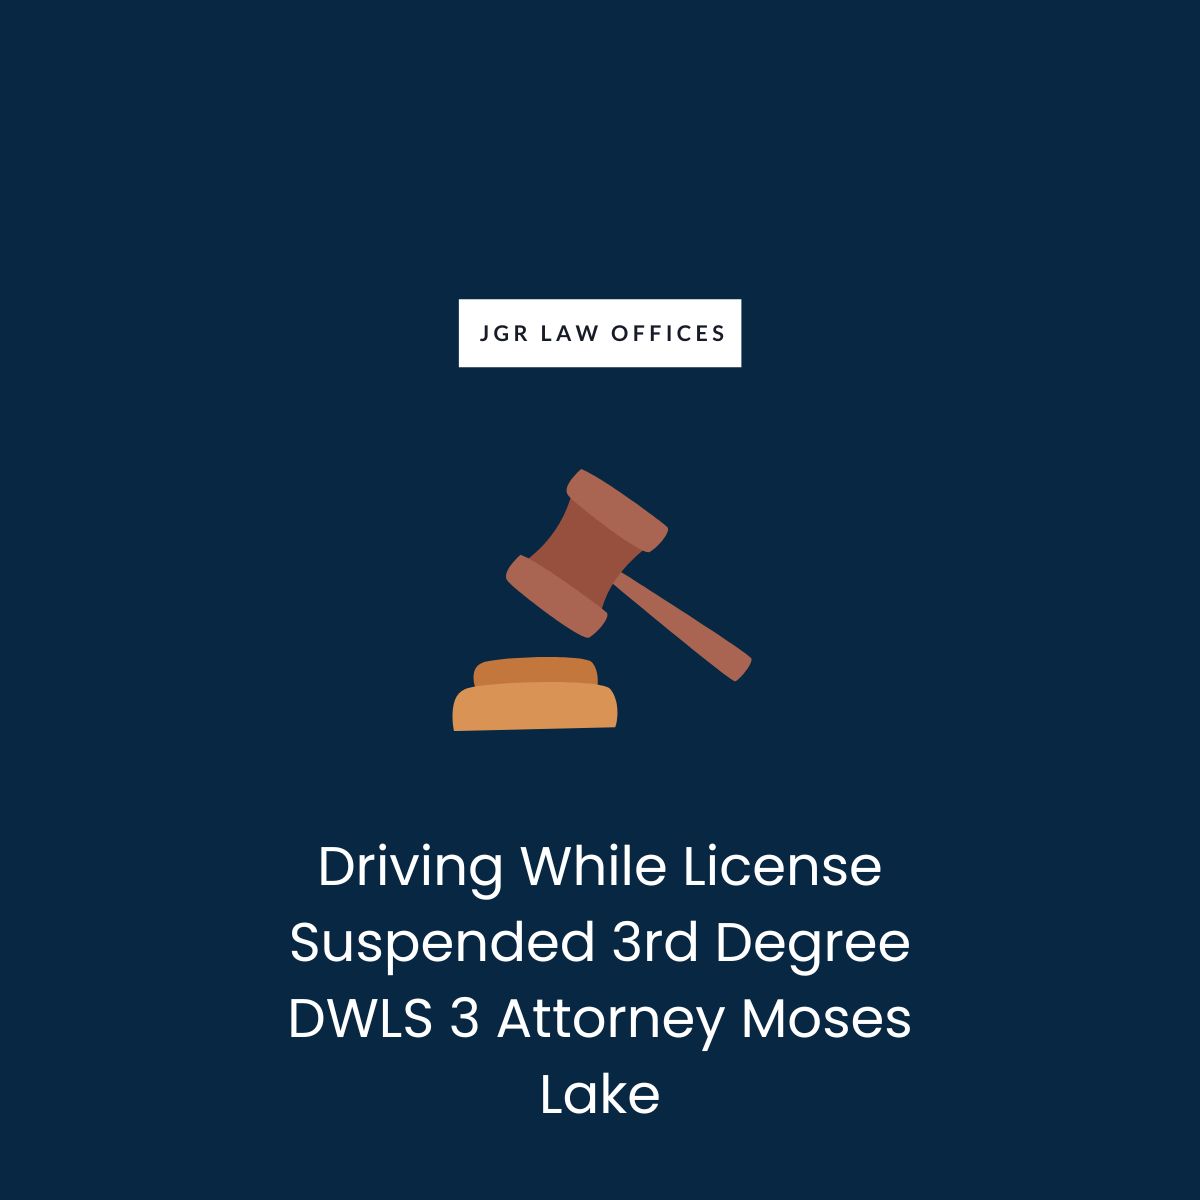 Driving While License Suspended 3rd Degree DWLS 3 Attorney Moses Lake Driving While License Suspended 3rd Degree DWLS 3